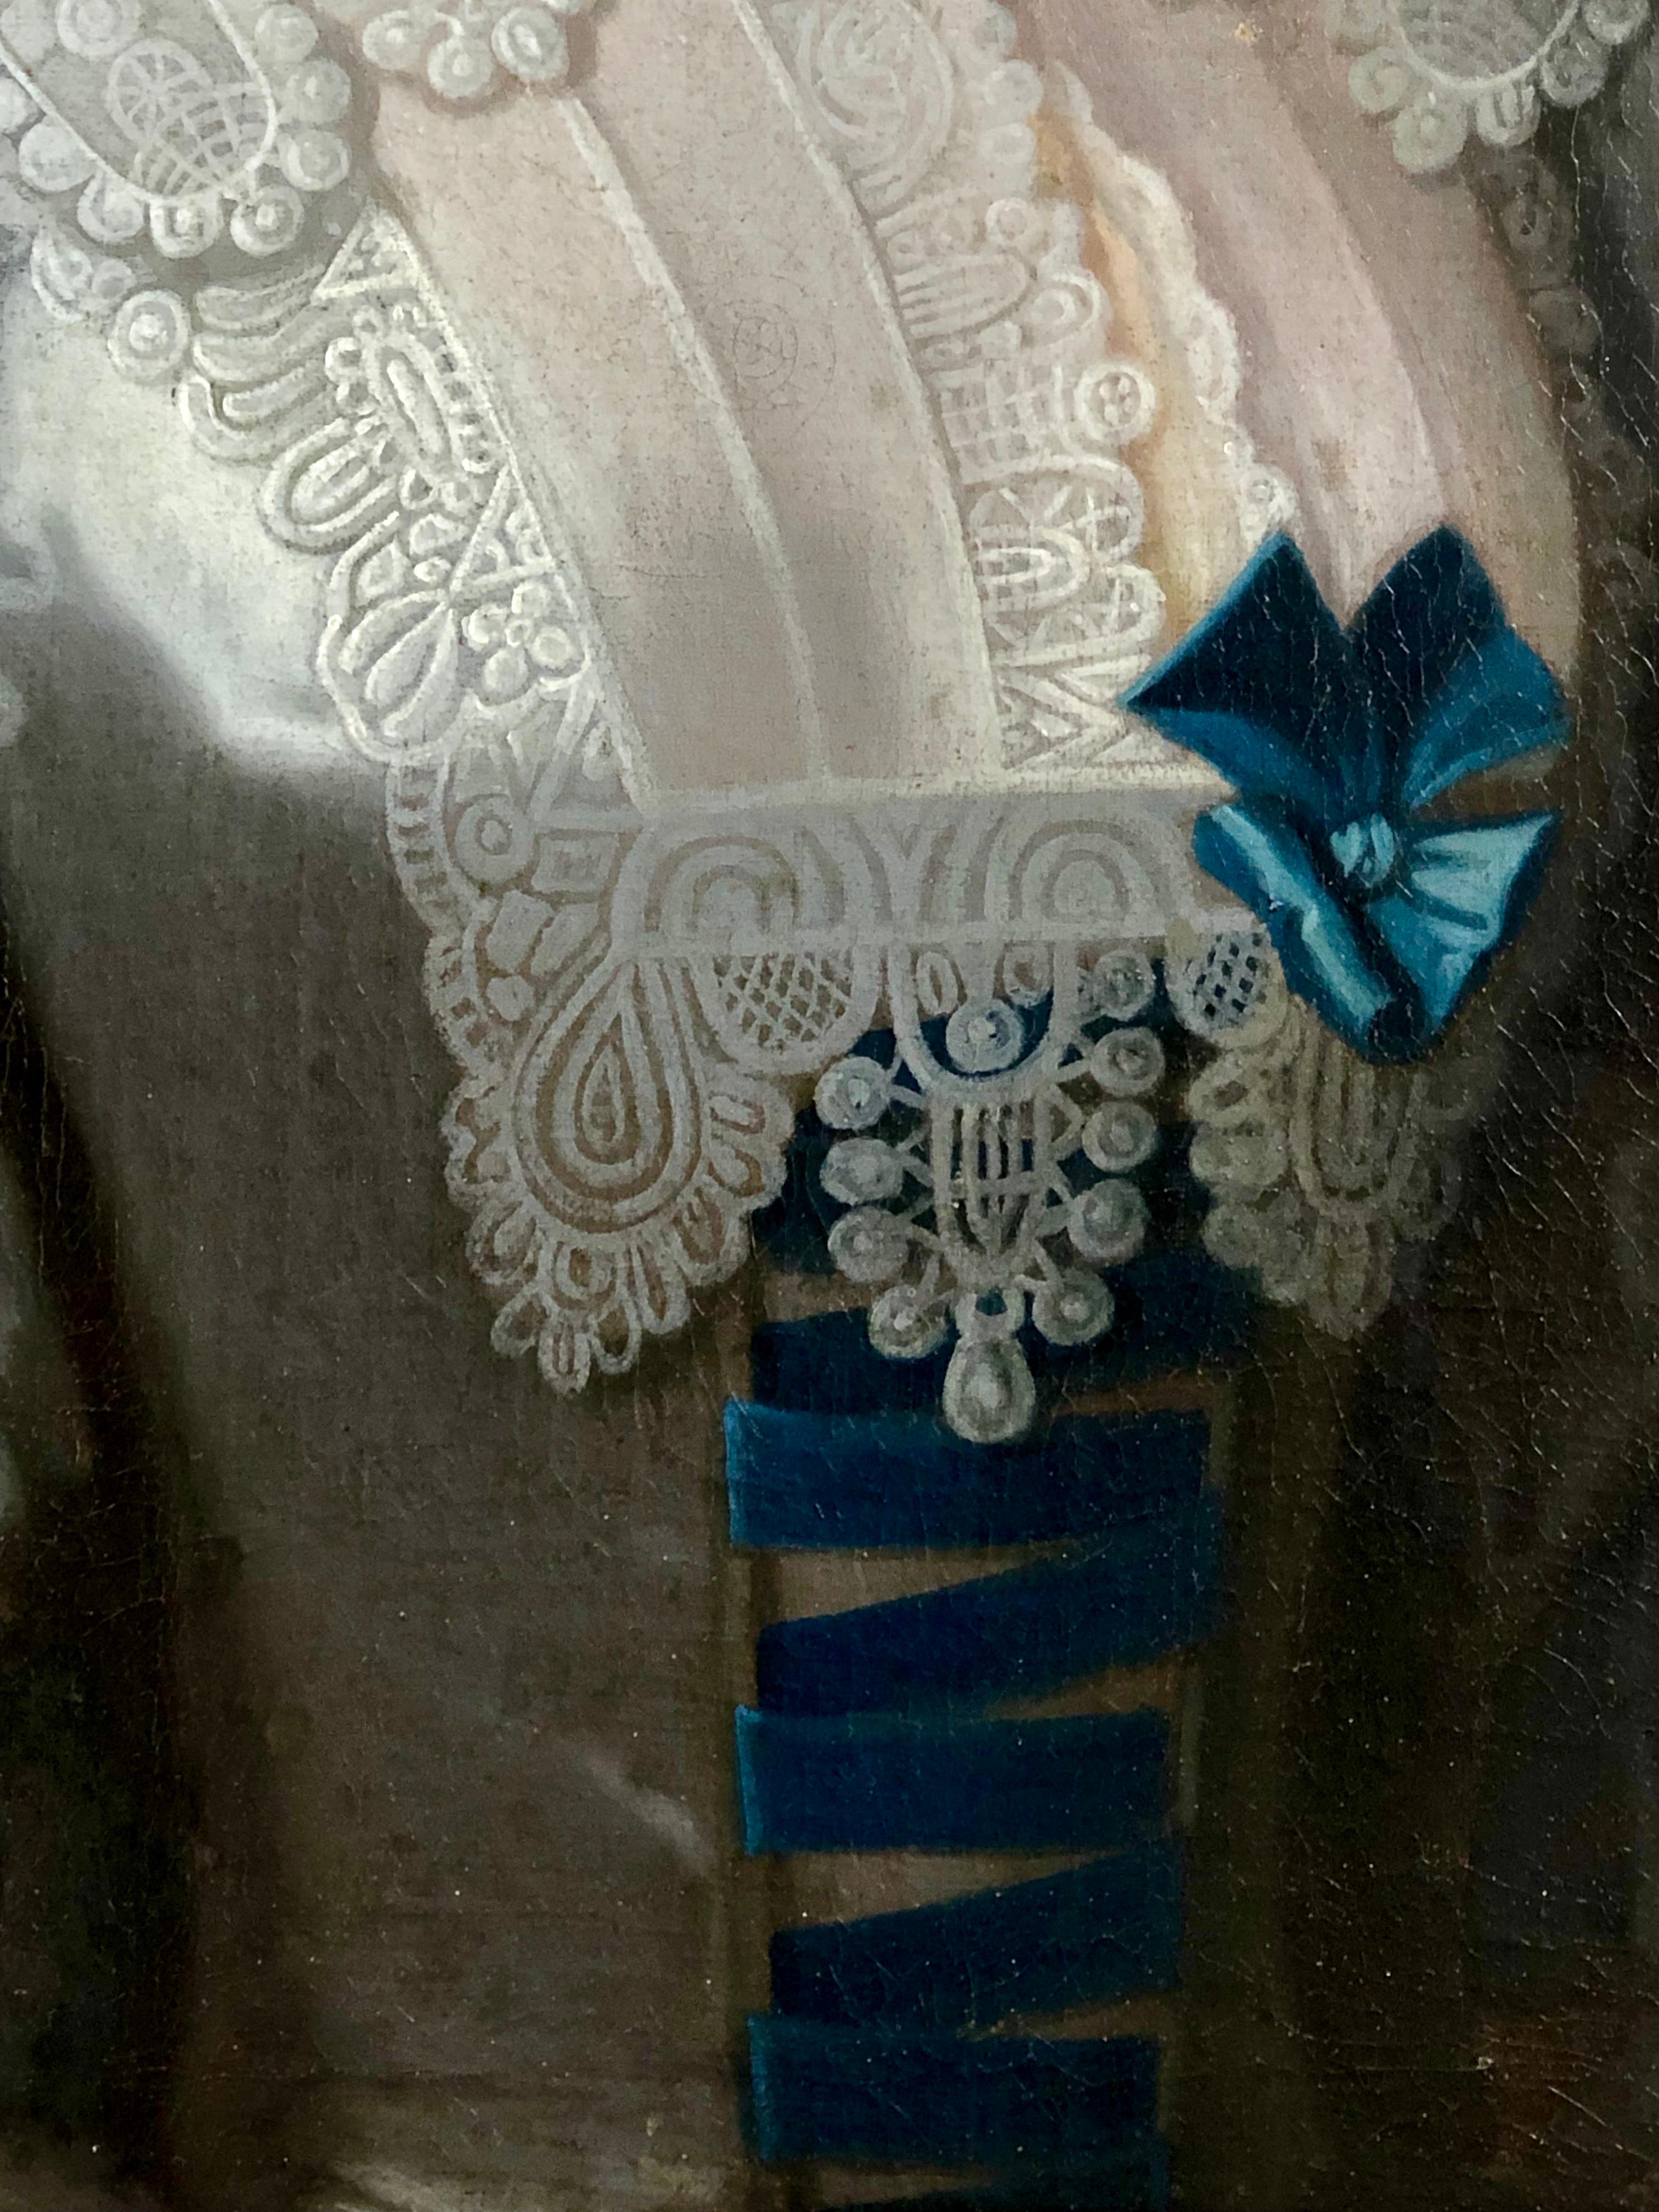 18th Century Portrait of a Lady in an Elaborate Blue and White Costume. - Black Portrait Painting by Enoch Seeman